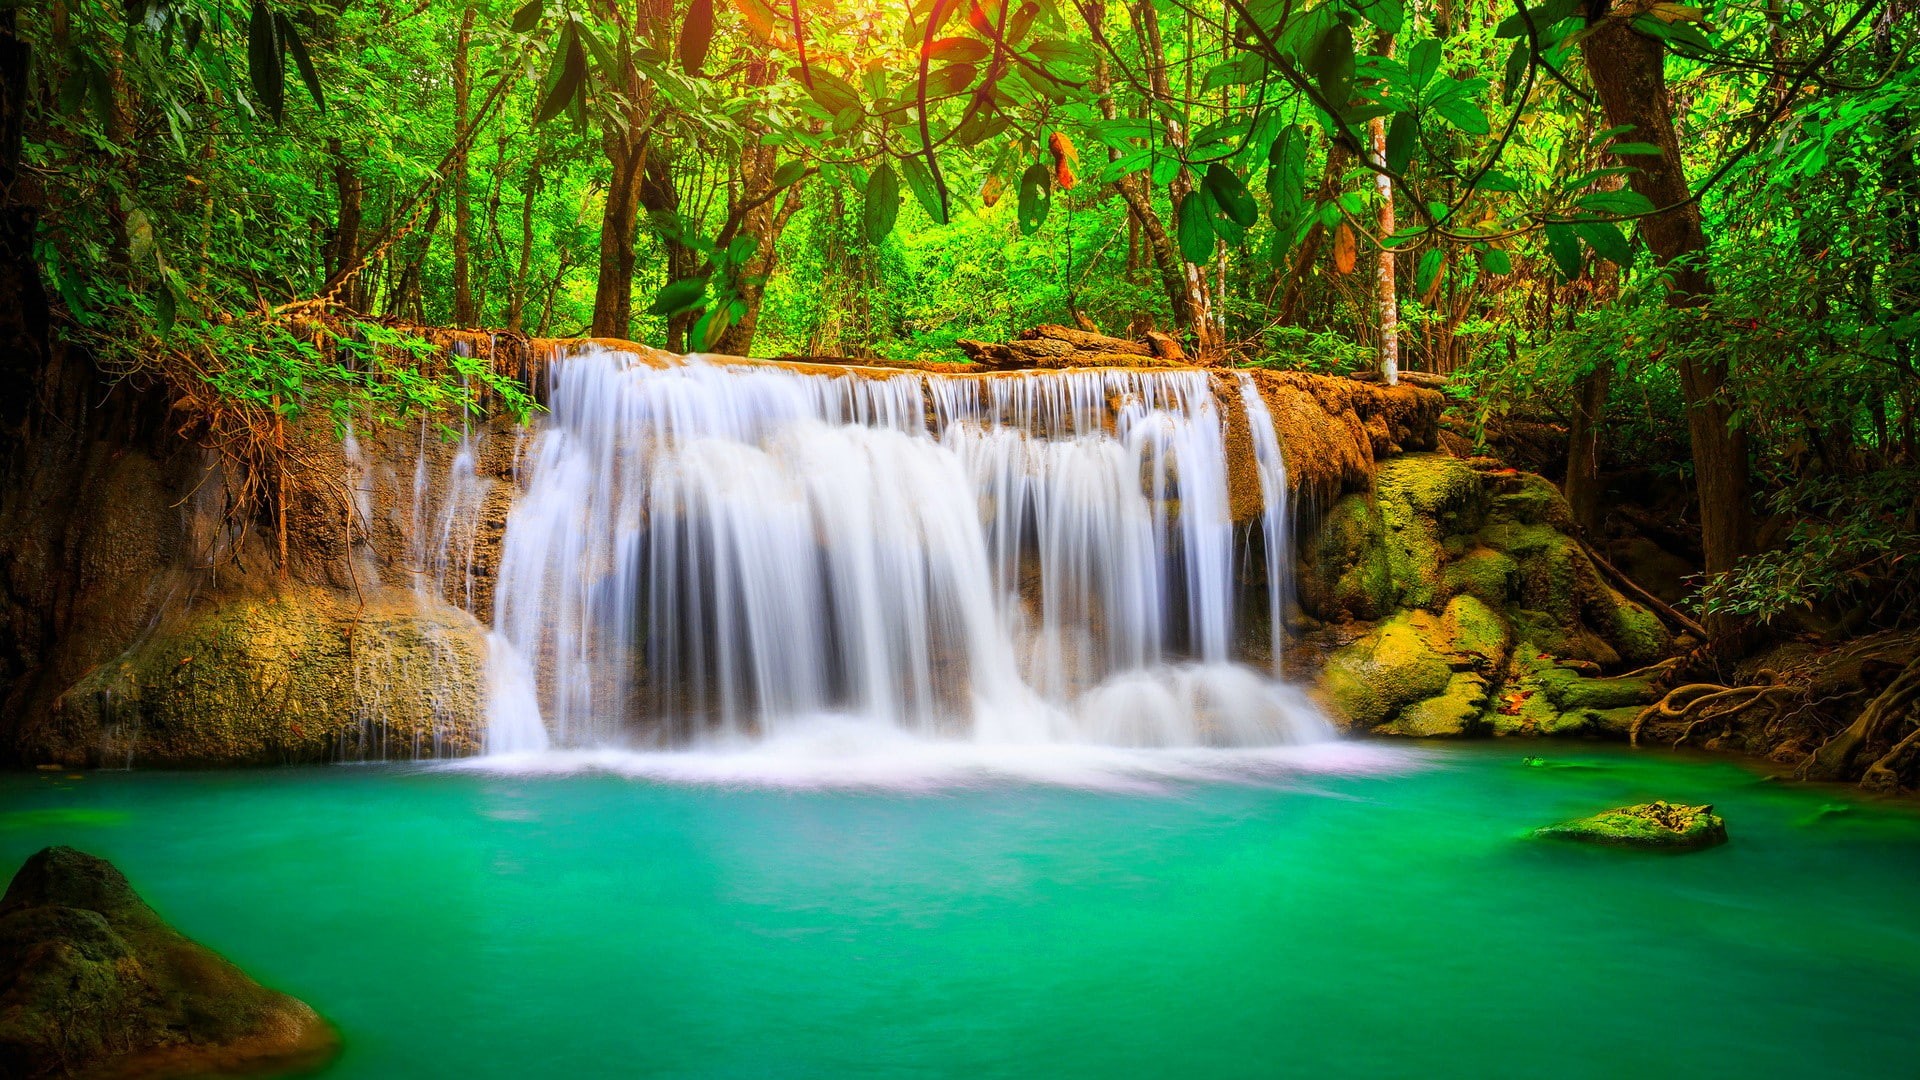 Wallpaper / uhd, k, water, blue, forest, 1080P, phones, mobile, tablet, background, android, trees, nature, waterfall, wonderful, green, tropical free download